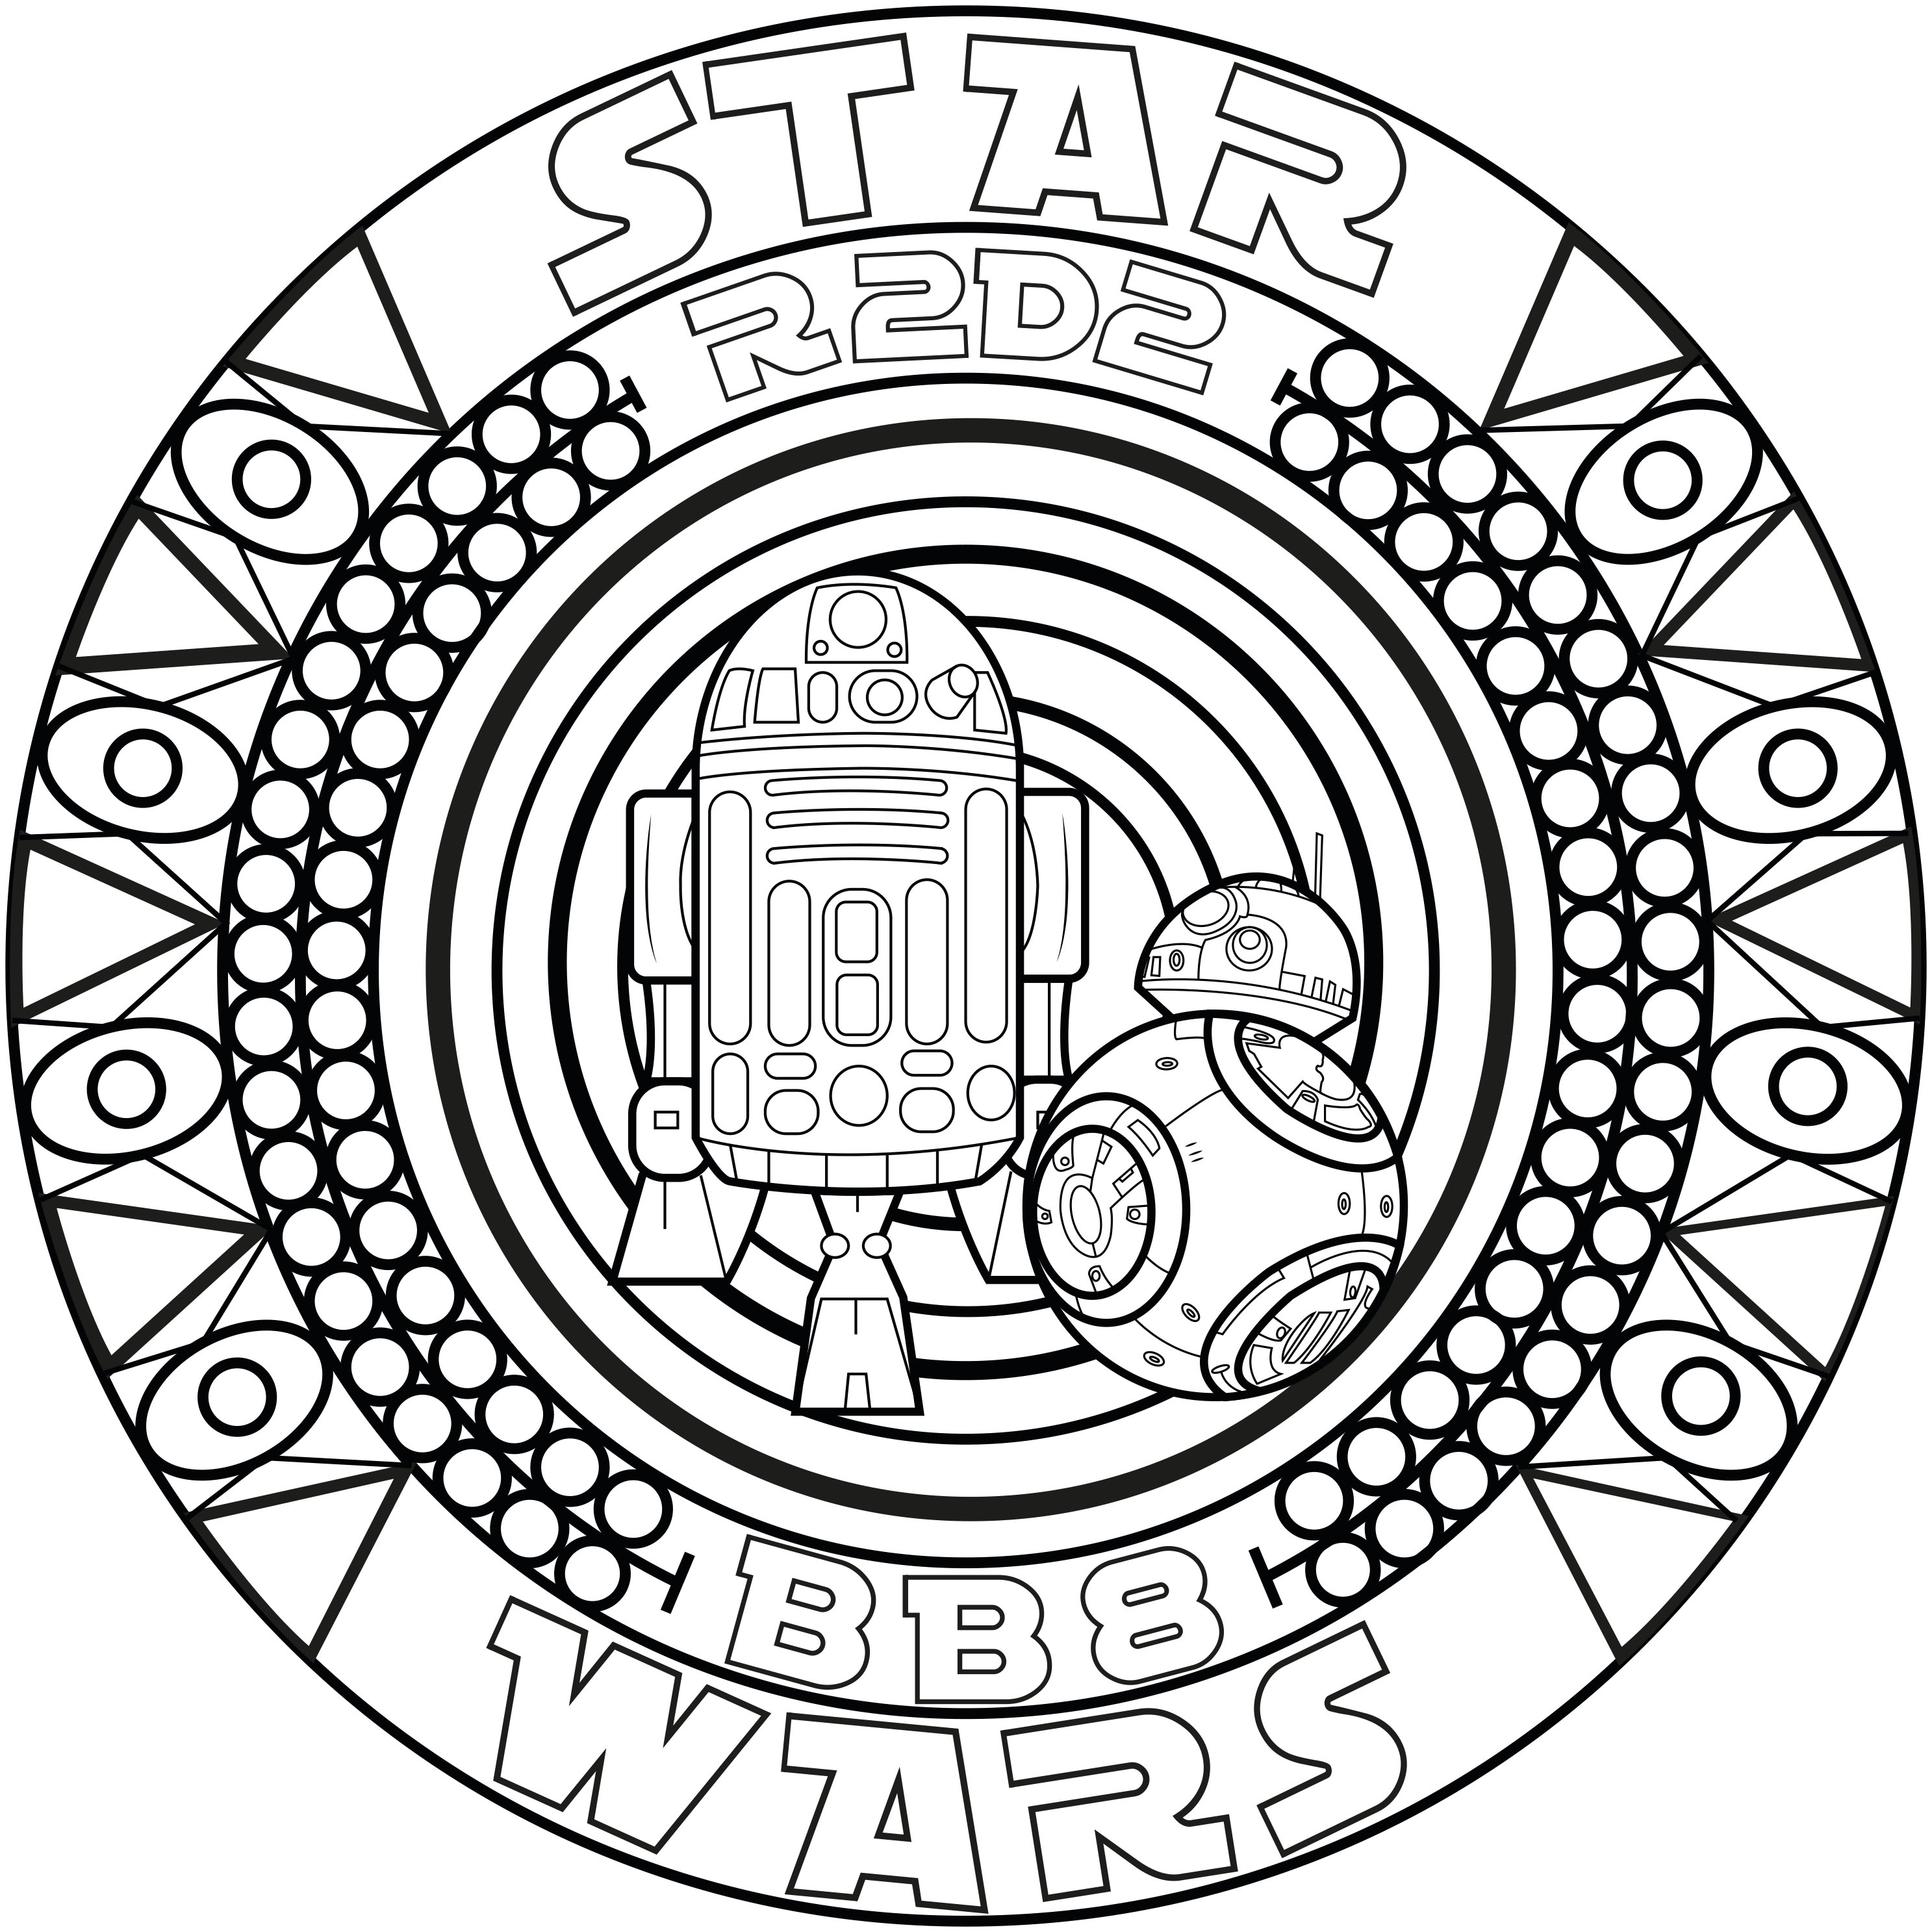 A mandala inspired by Star Wars with the robots BB8 and R2D2, Artist : Allan